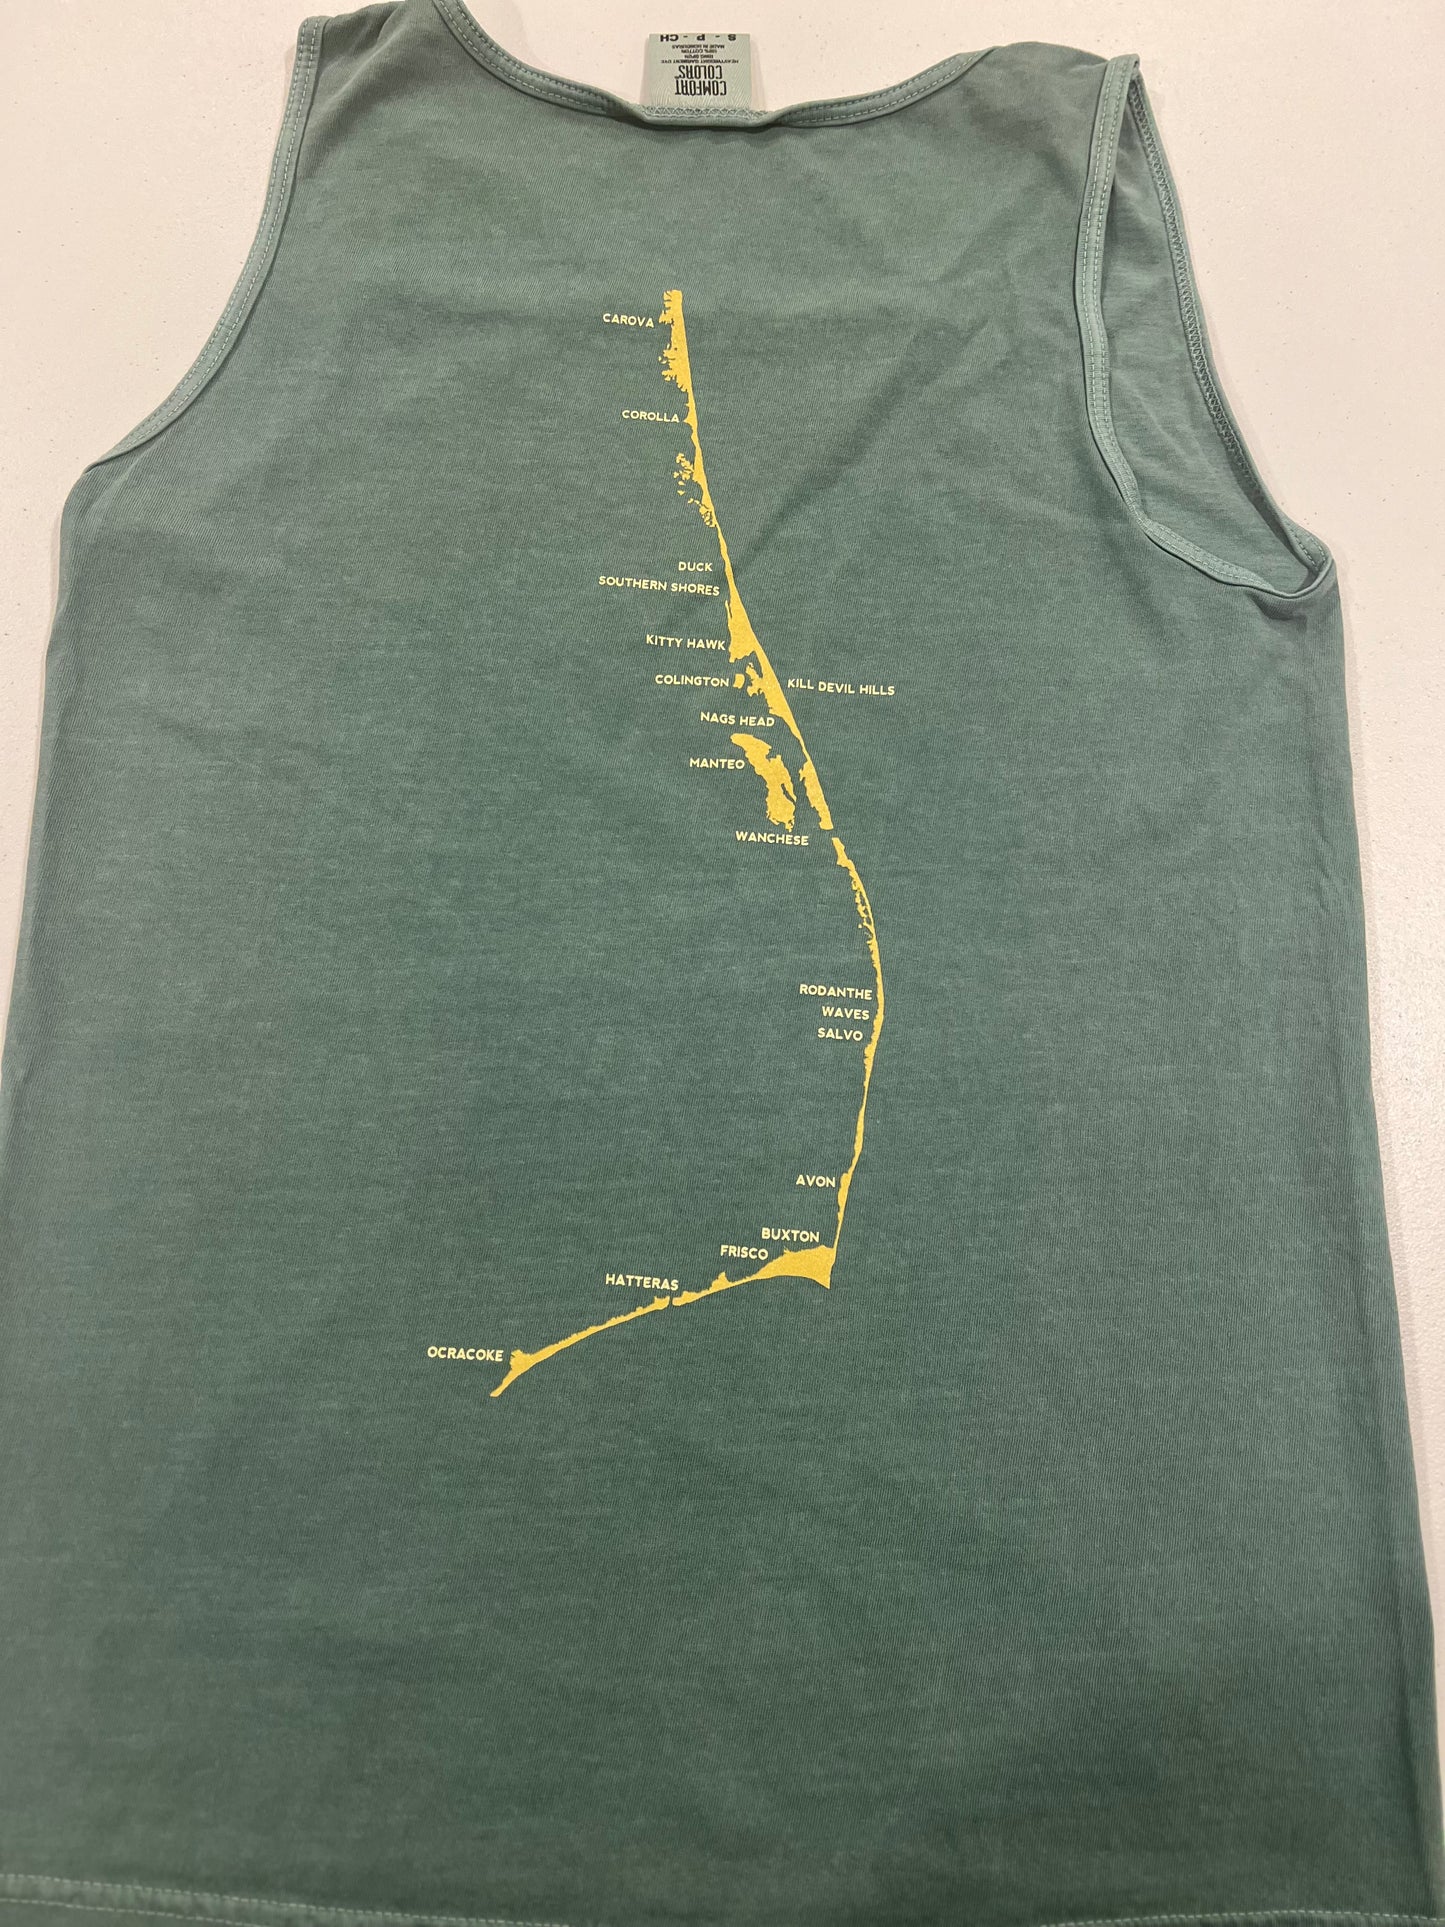 OBX of NC adult tank top